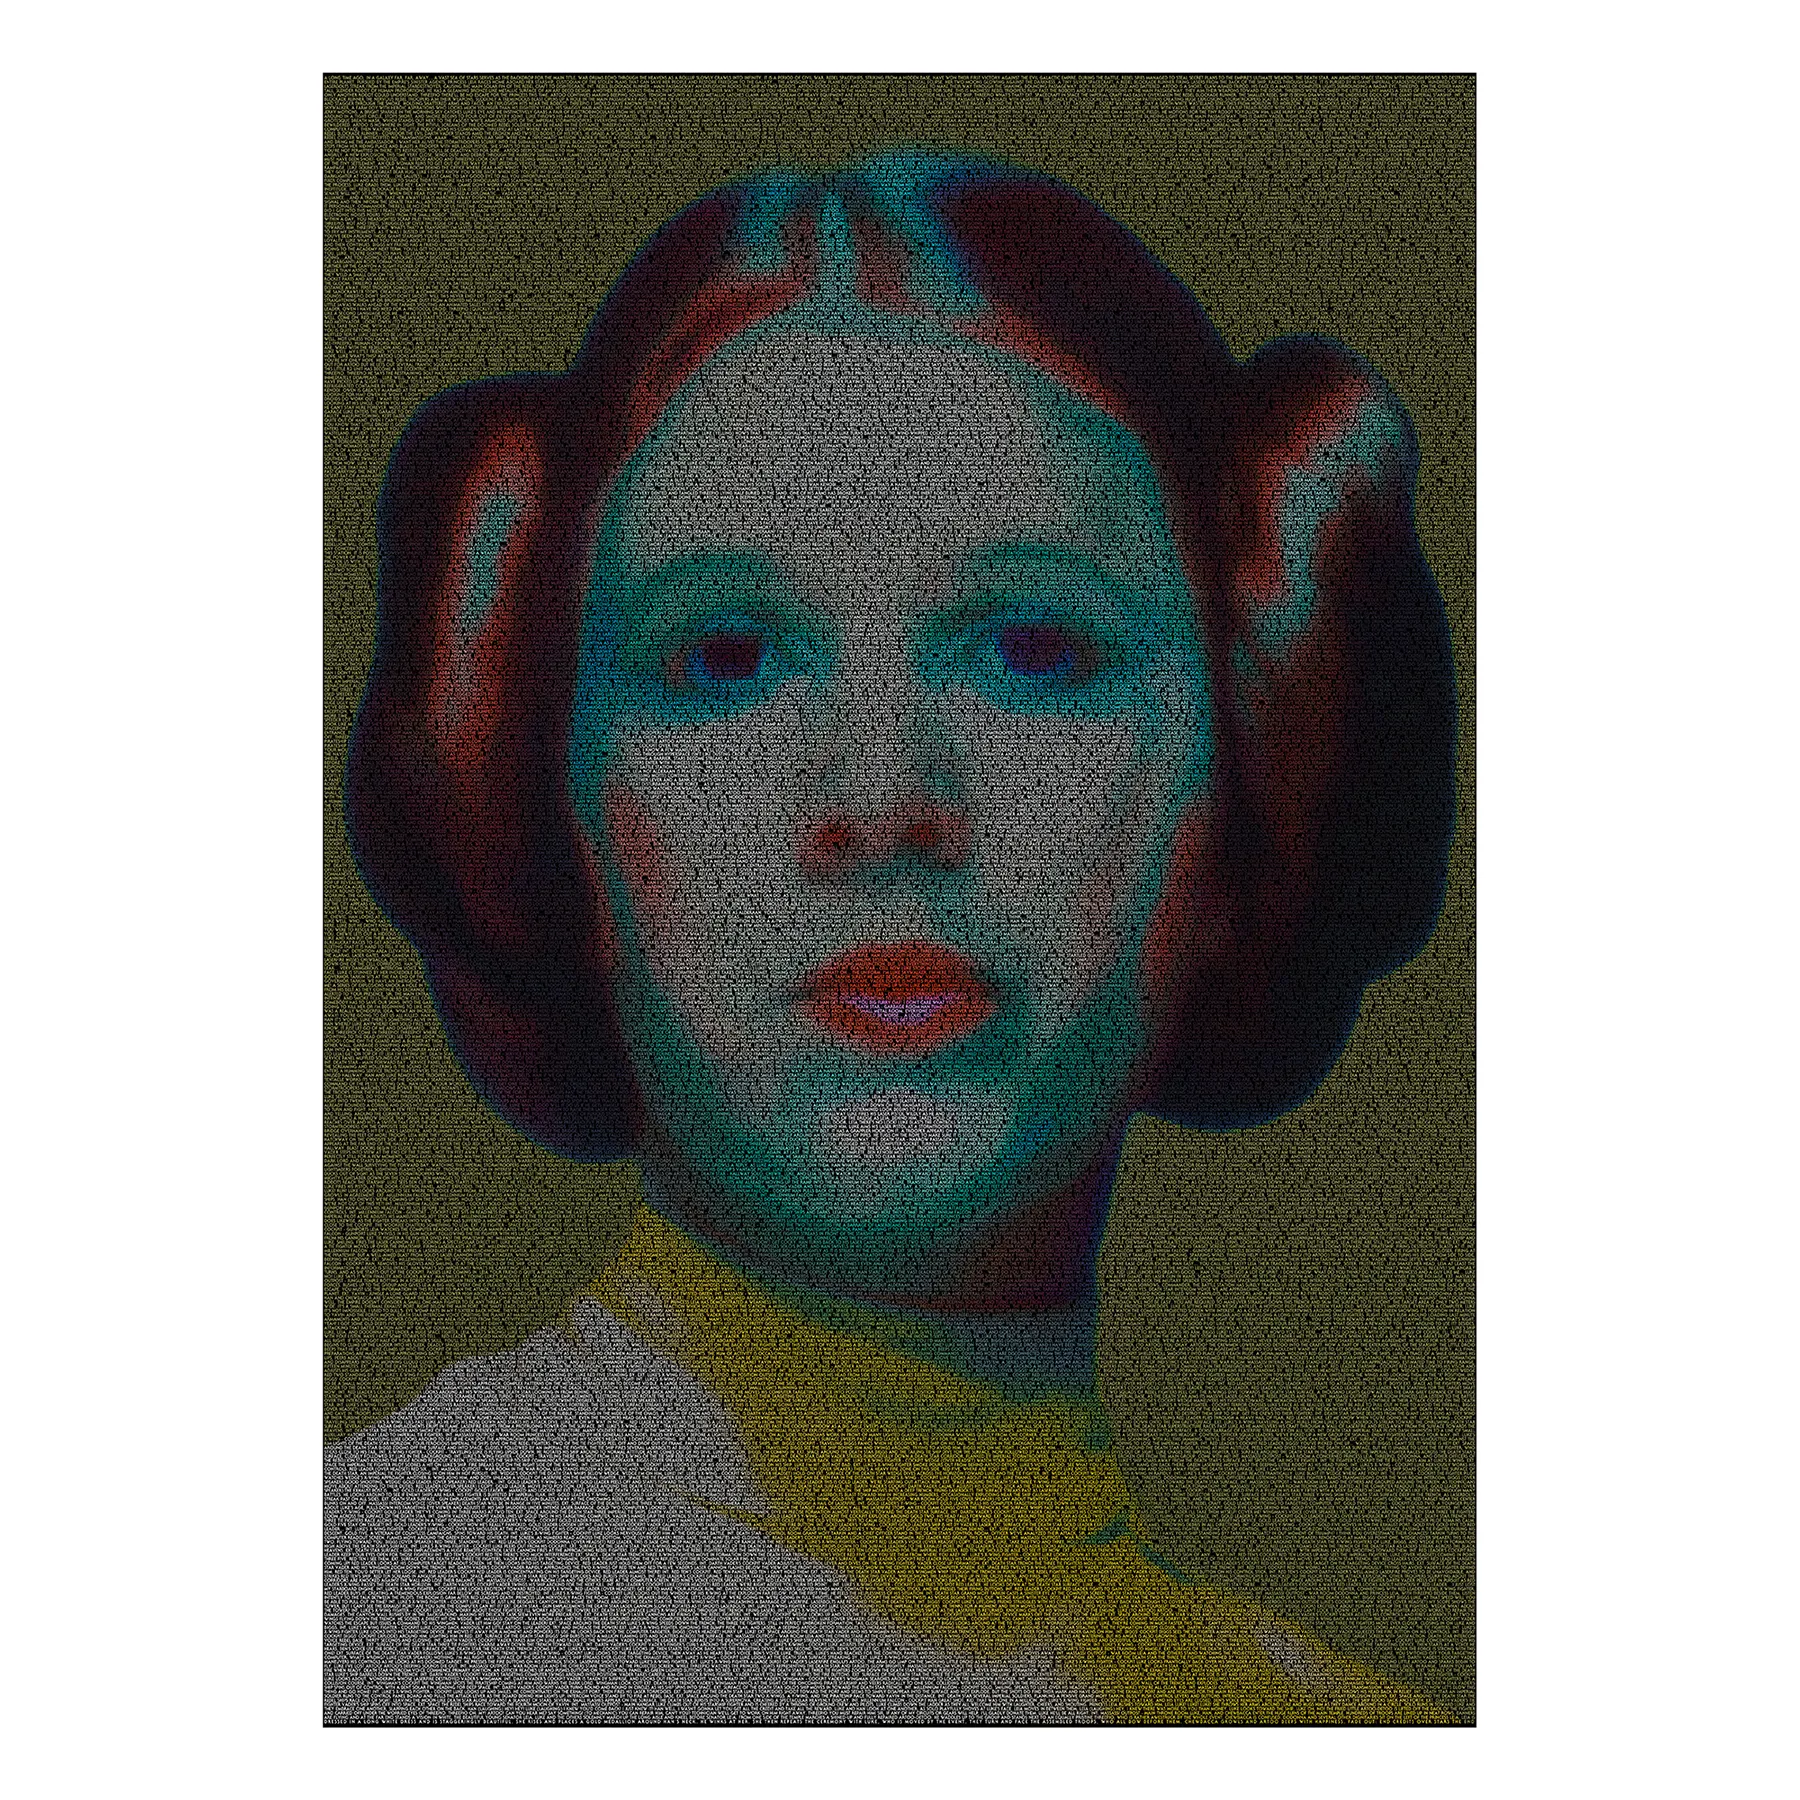 A portrait of Carrie Fisher as Princess Leia, created from the Star Wars script/